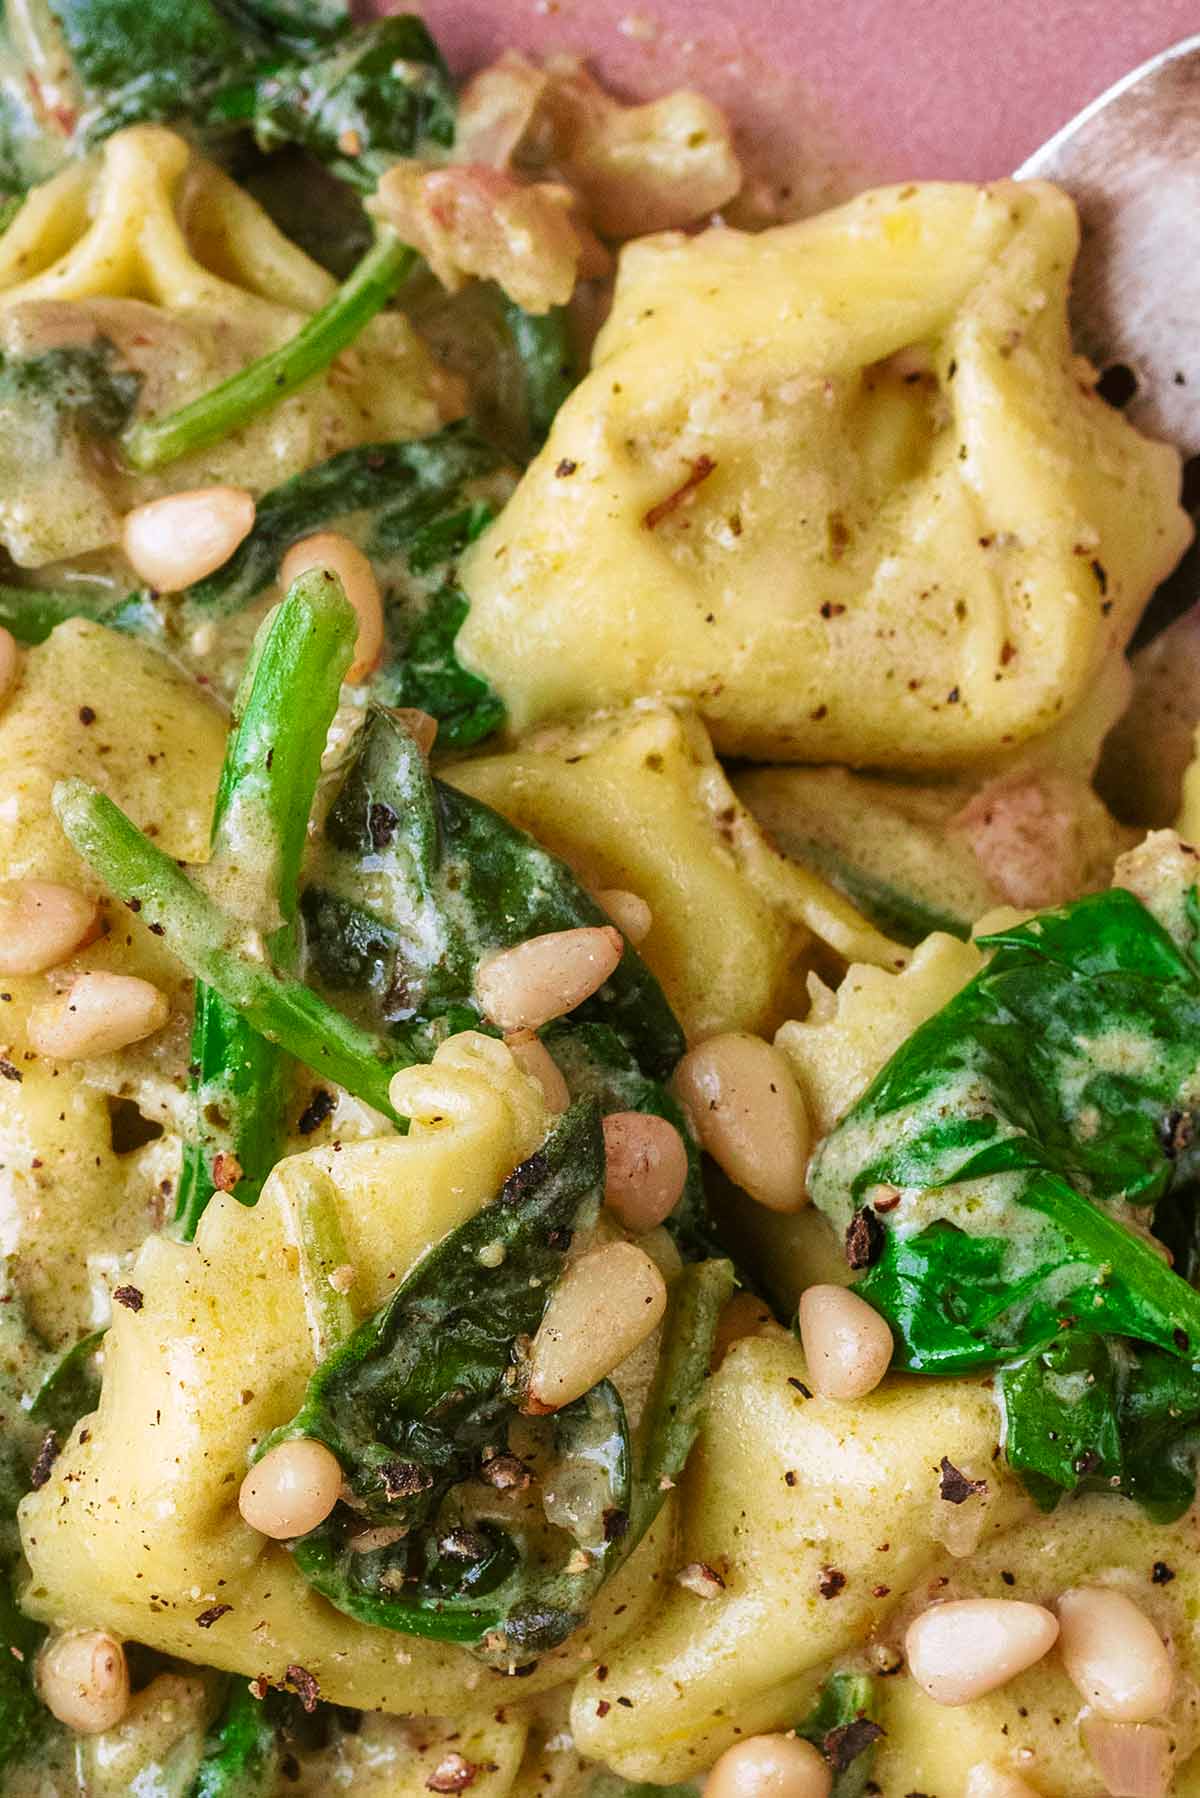 Pine nuts sprinkled over cooked tortellini.